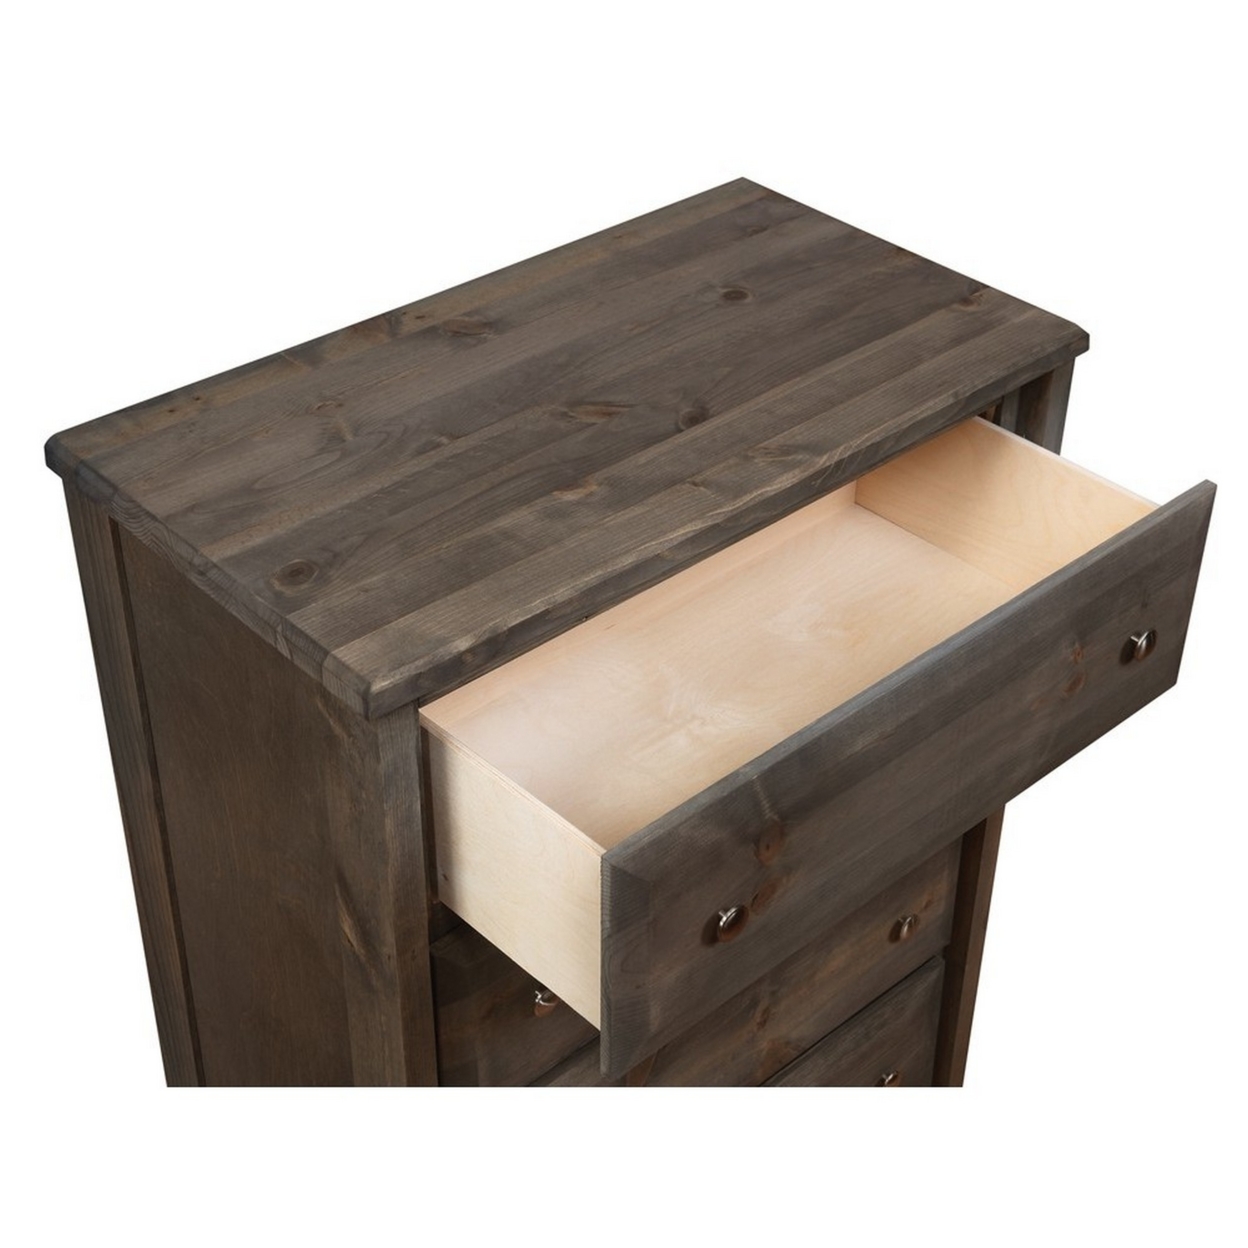 Transitional Style Wooden Chest With 4 Drawer Setup And Tapered Legs, Brown- Saltoro Sherpi